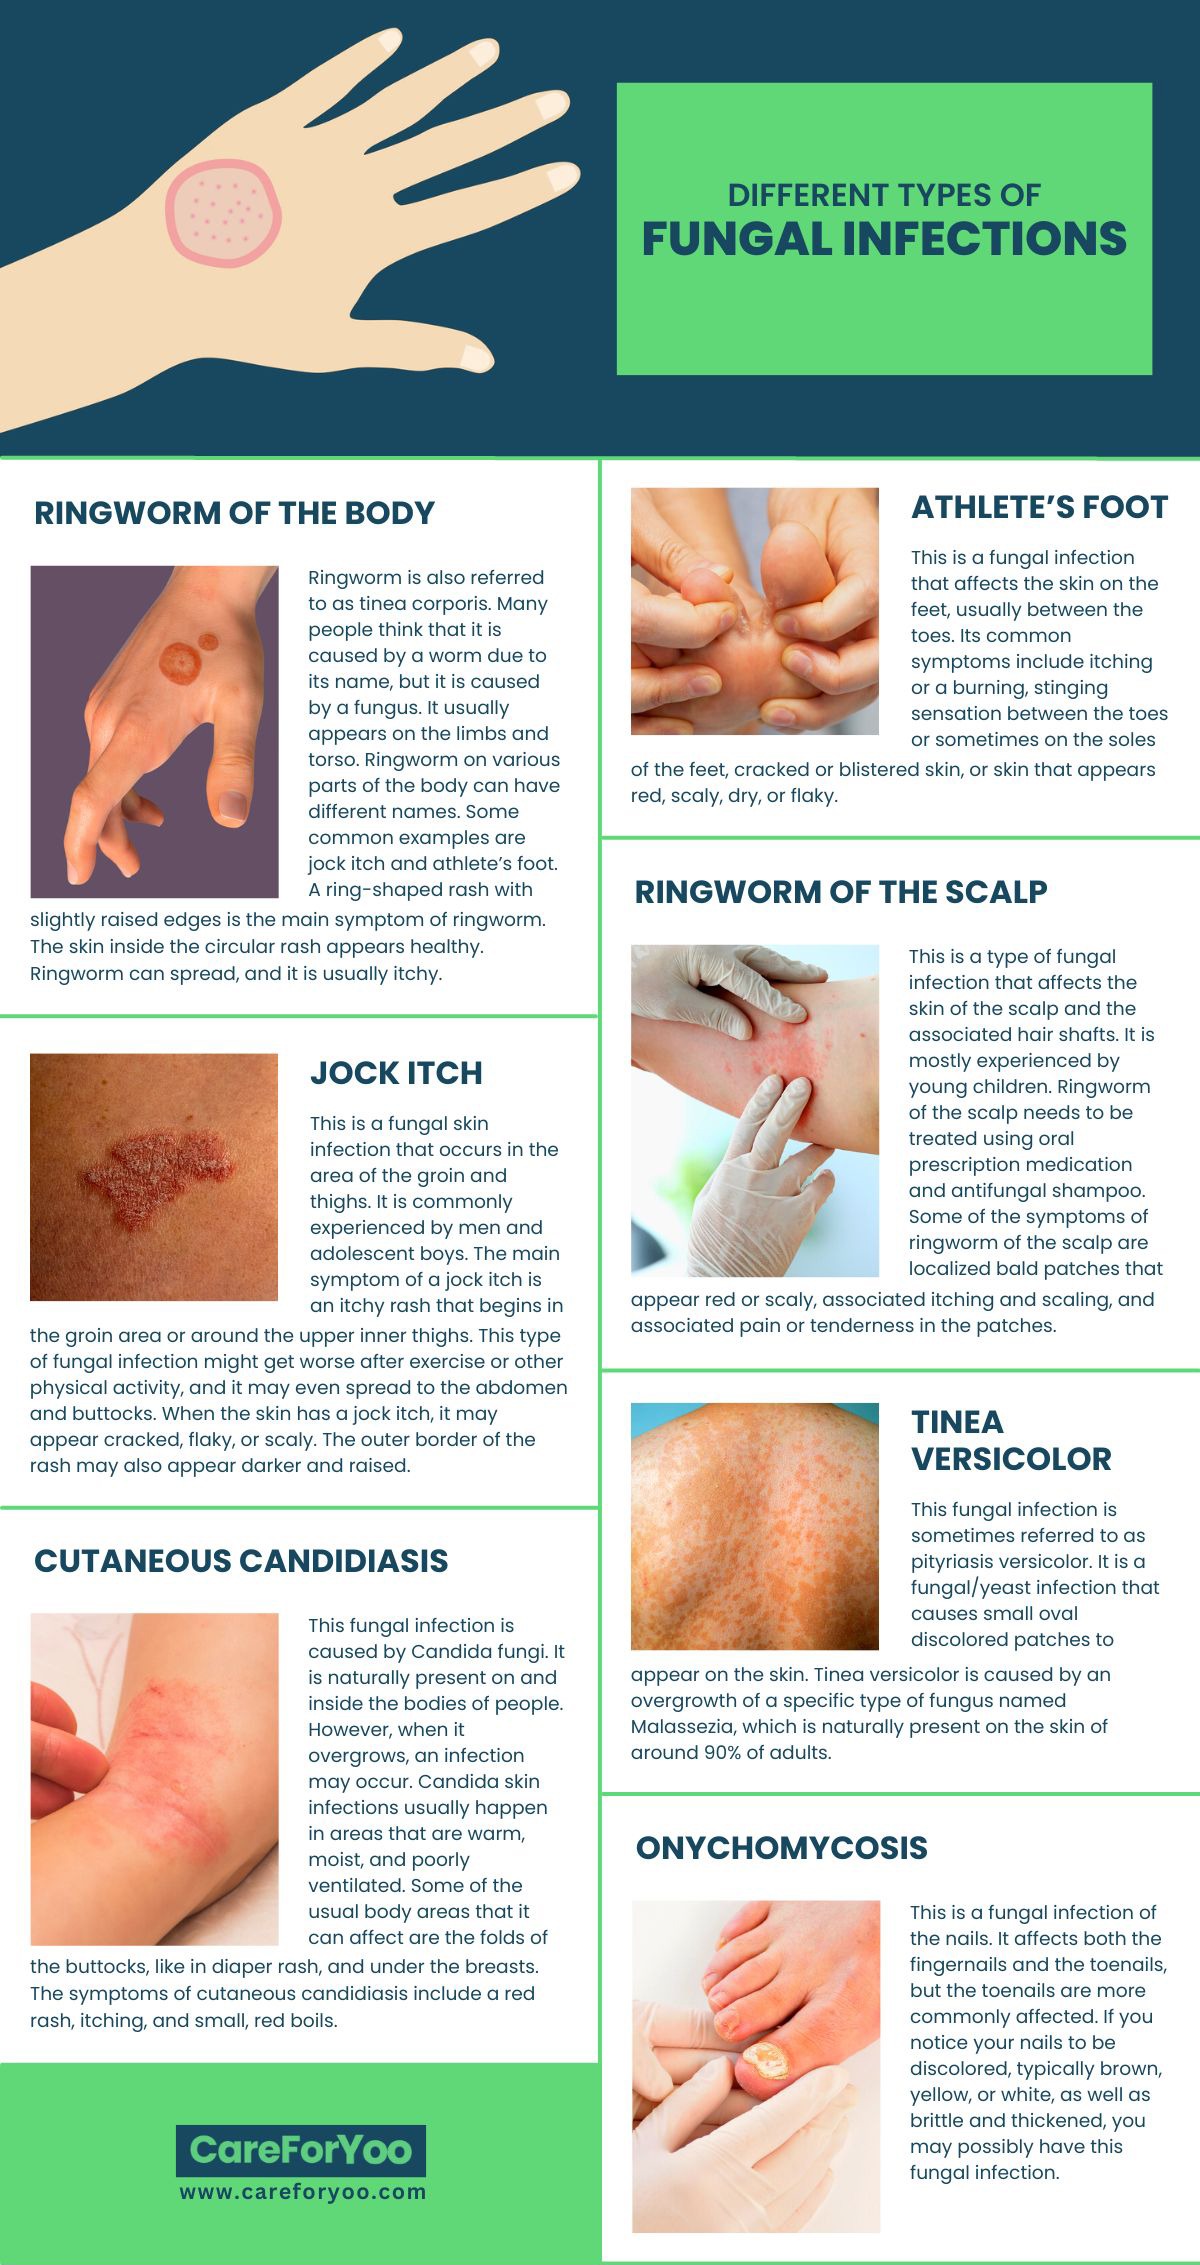 Different Types of Fungal Infections